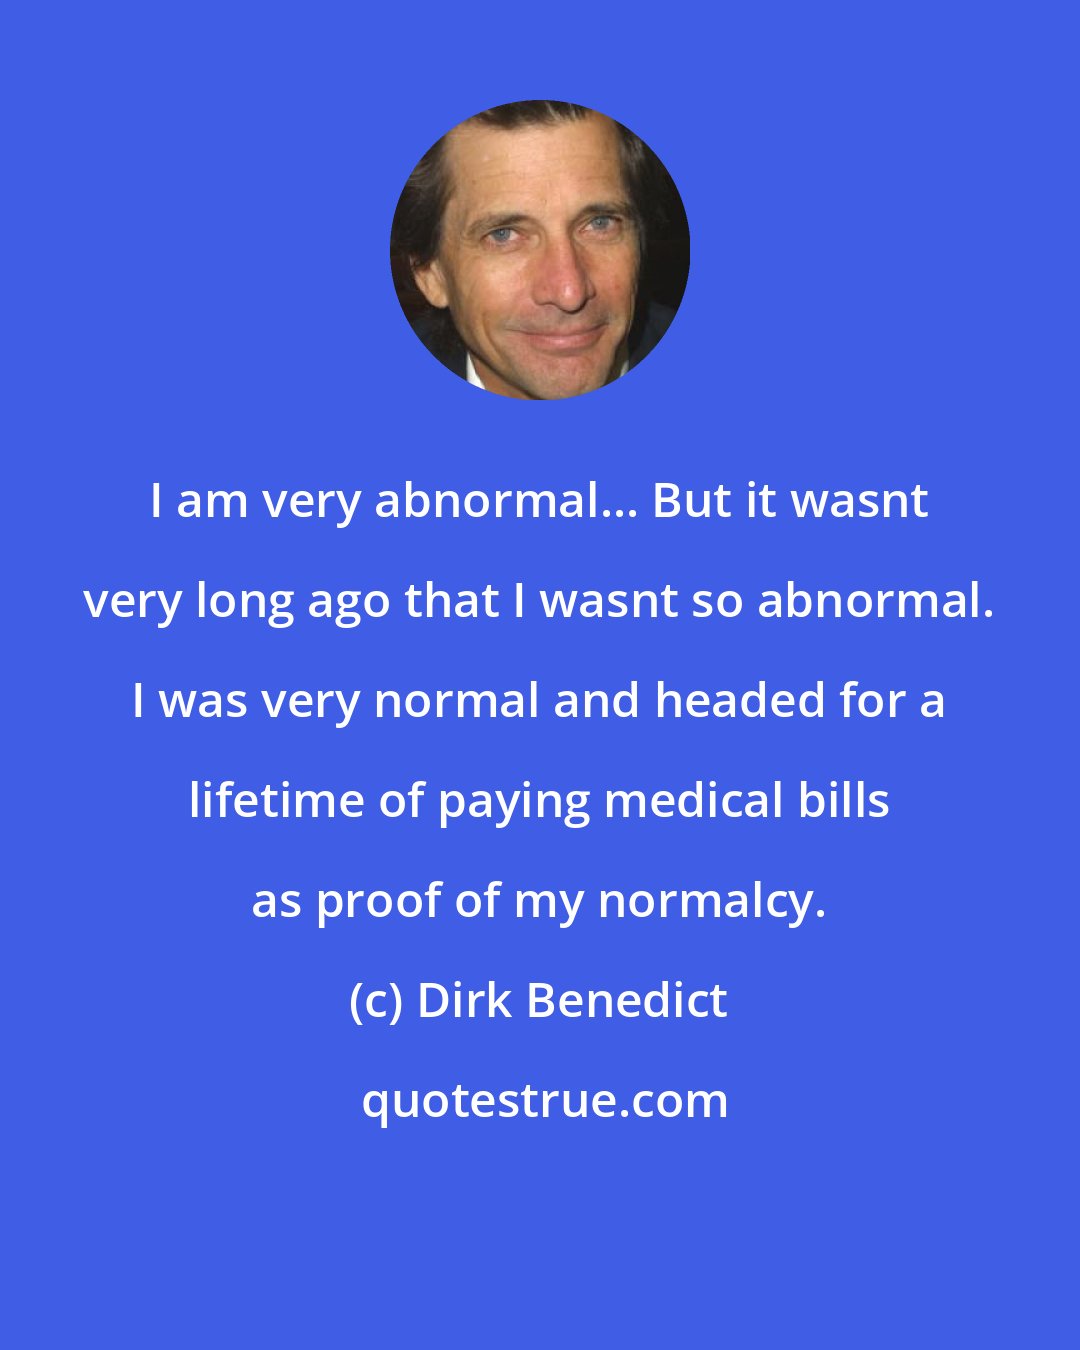 Dirk Benedict: I am very abnormal... But it wasnt very long ago that I wasnt so abnormal. I was very normal and headed for a lifetime of paying medical bills as proof of my normalcy.